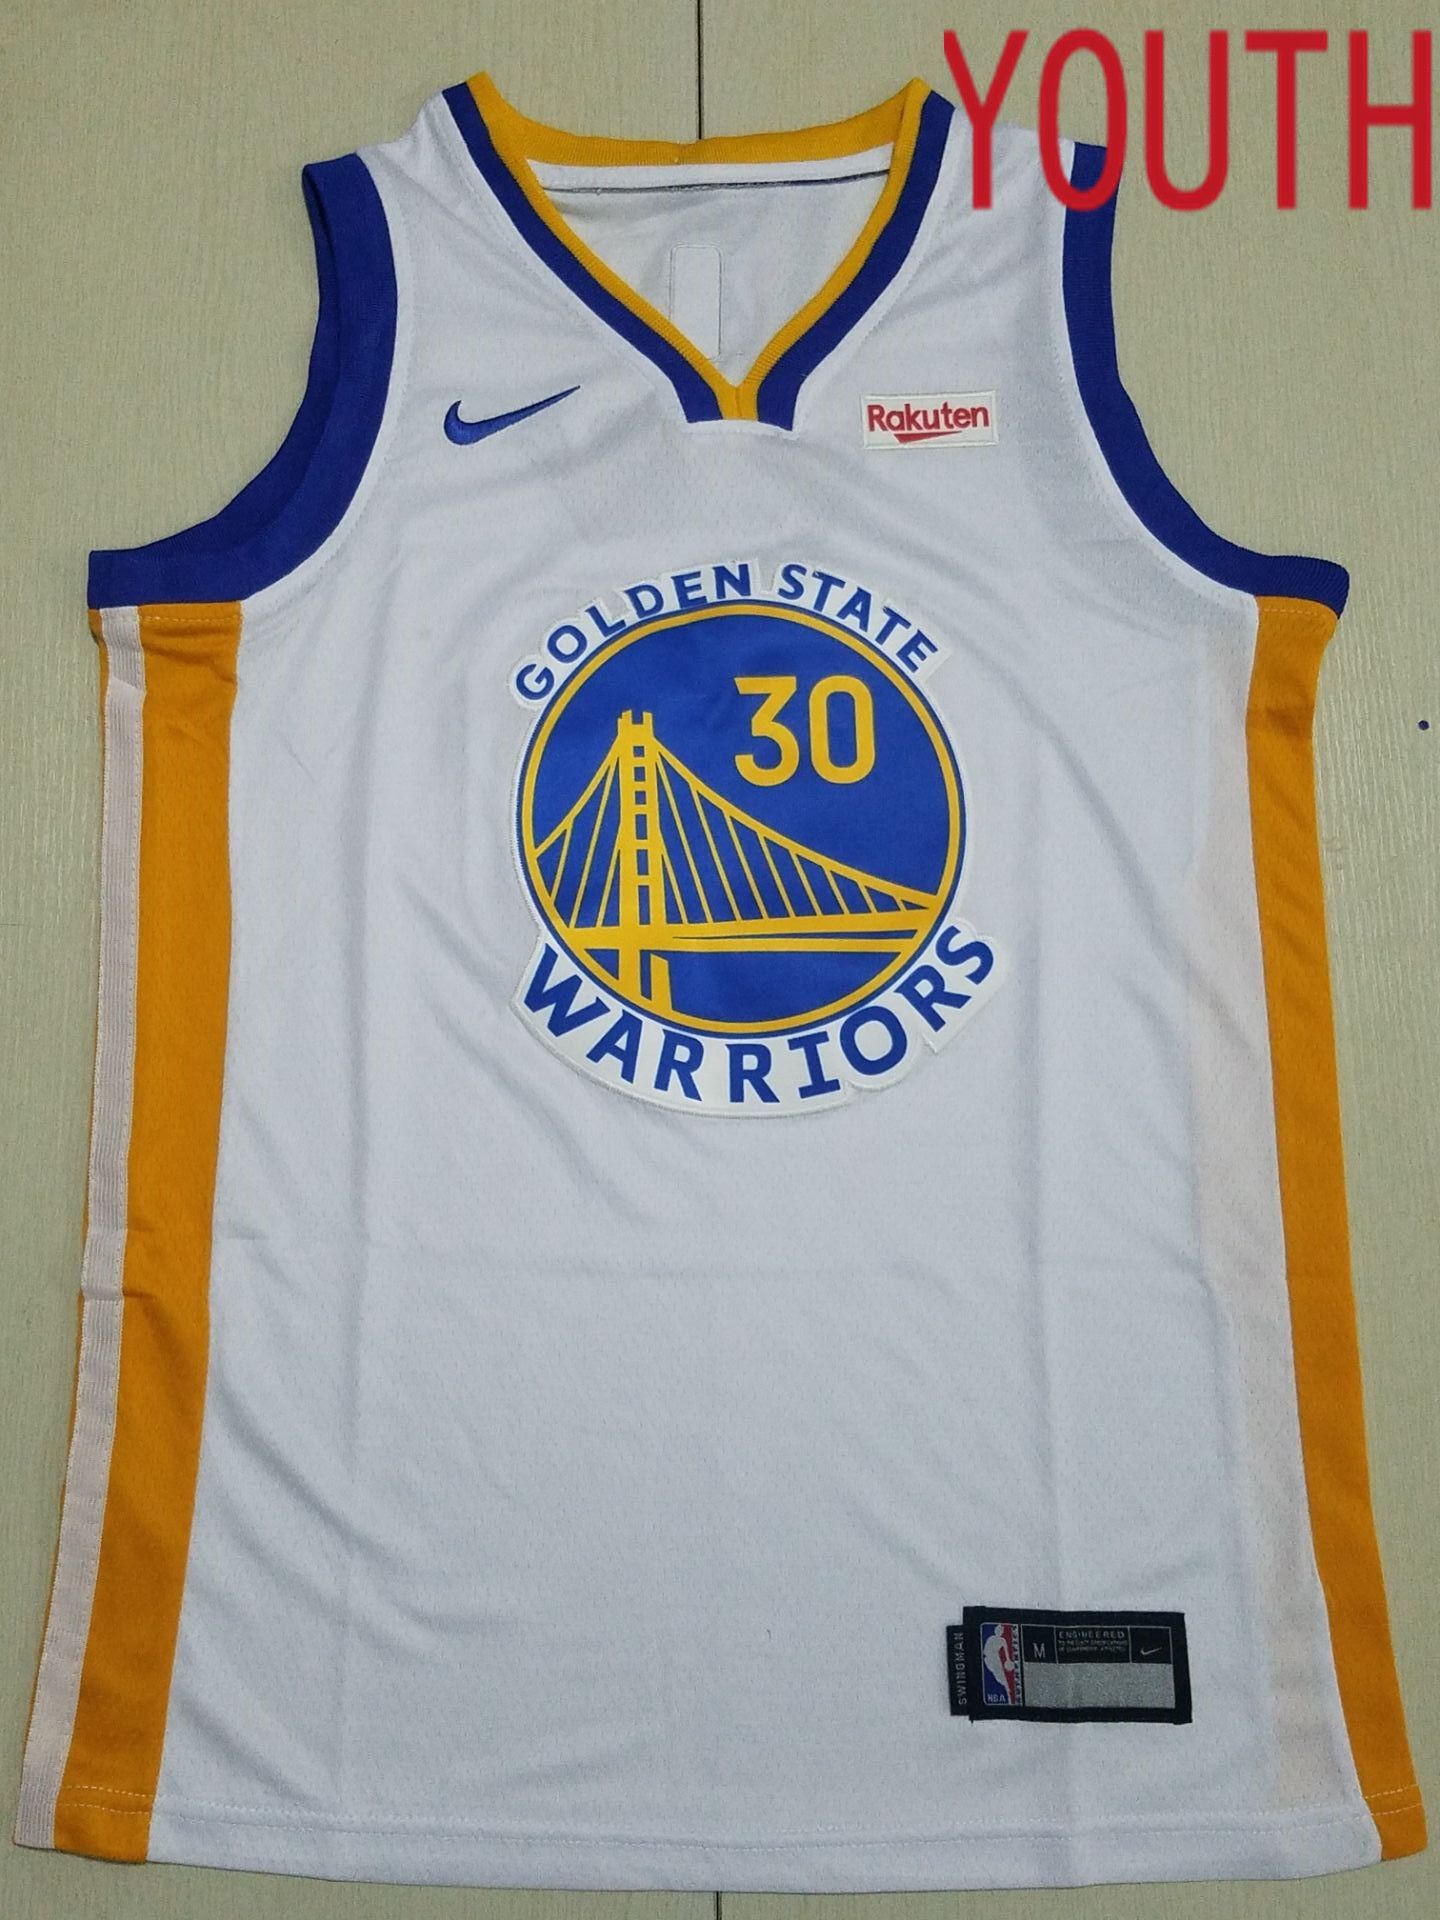 Youth Golden State Warriors #30 Curry White Nike 2022 NBA Jersey